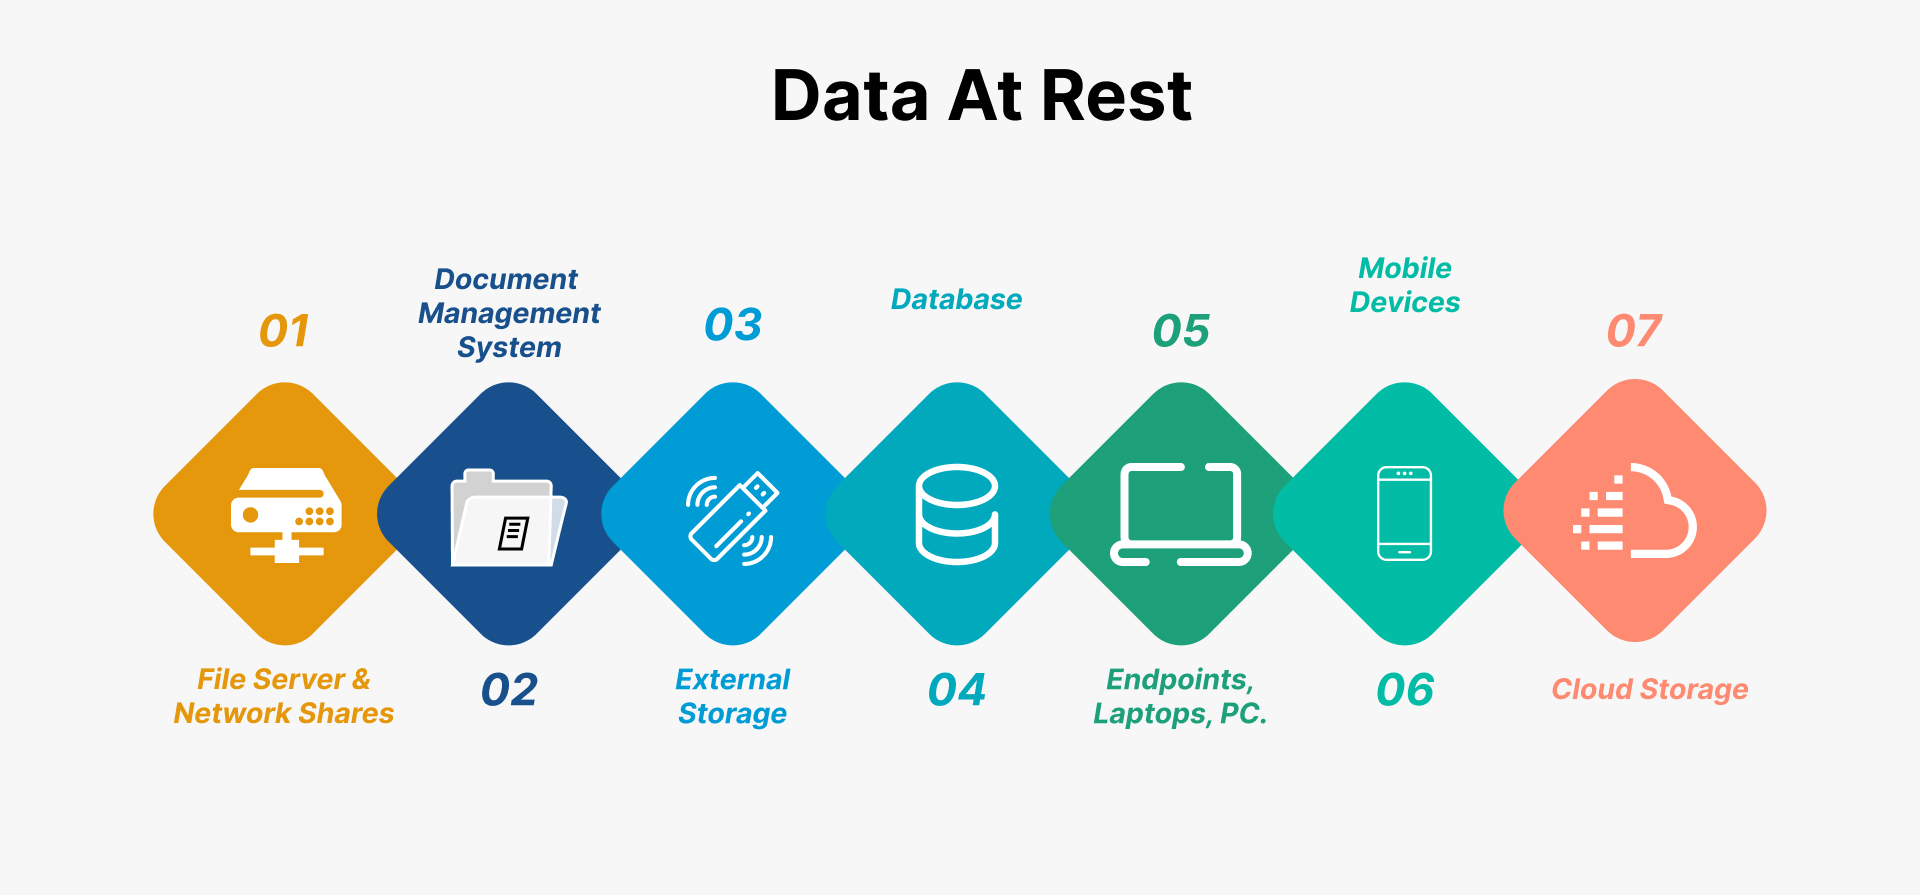 Data At Rest